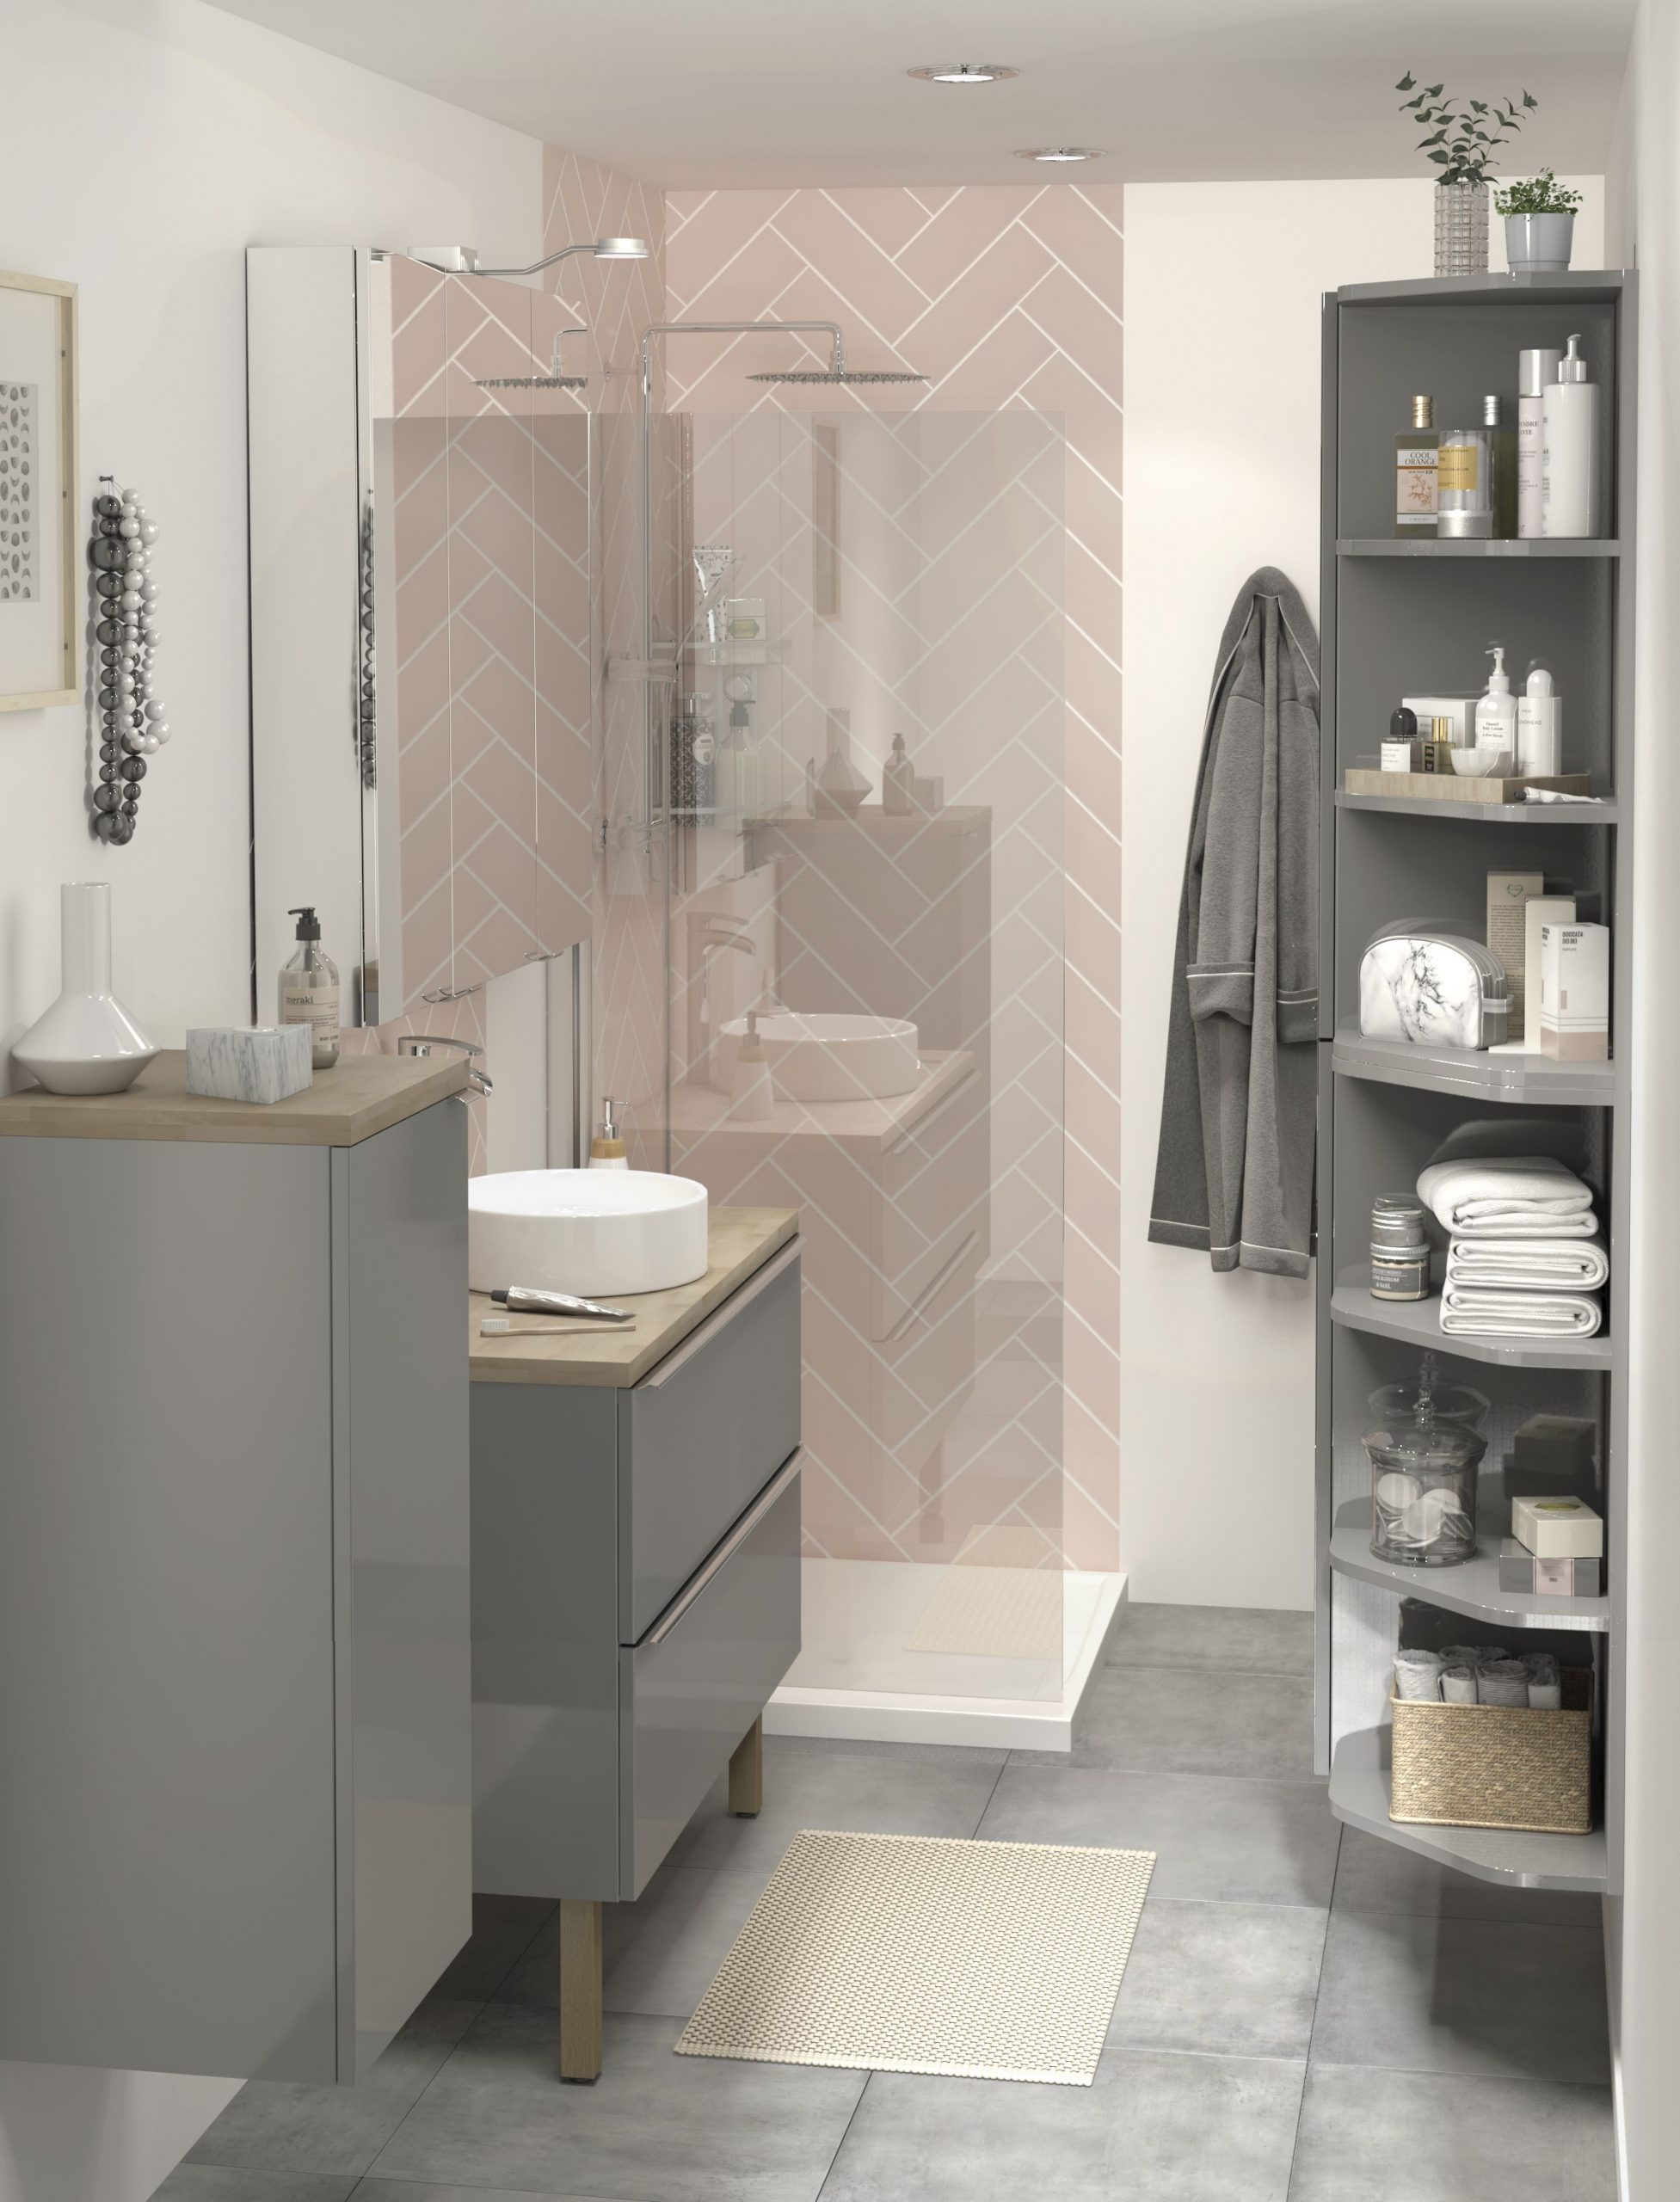 The Imandra Bathroom Collection From Bq Not Only Comes In A within dimensions 2289 X 3000